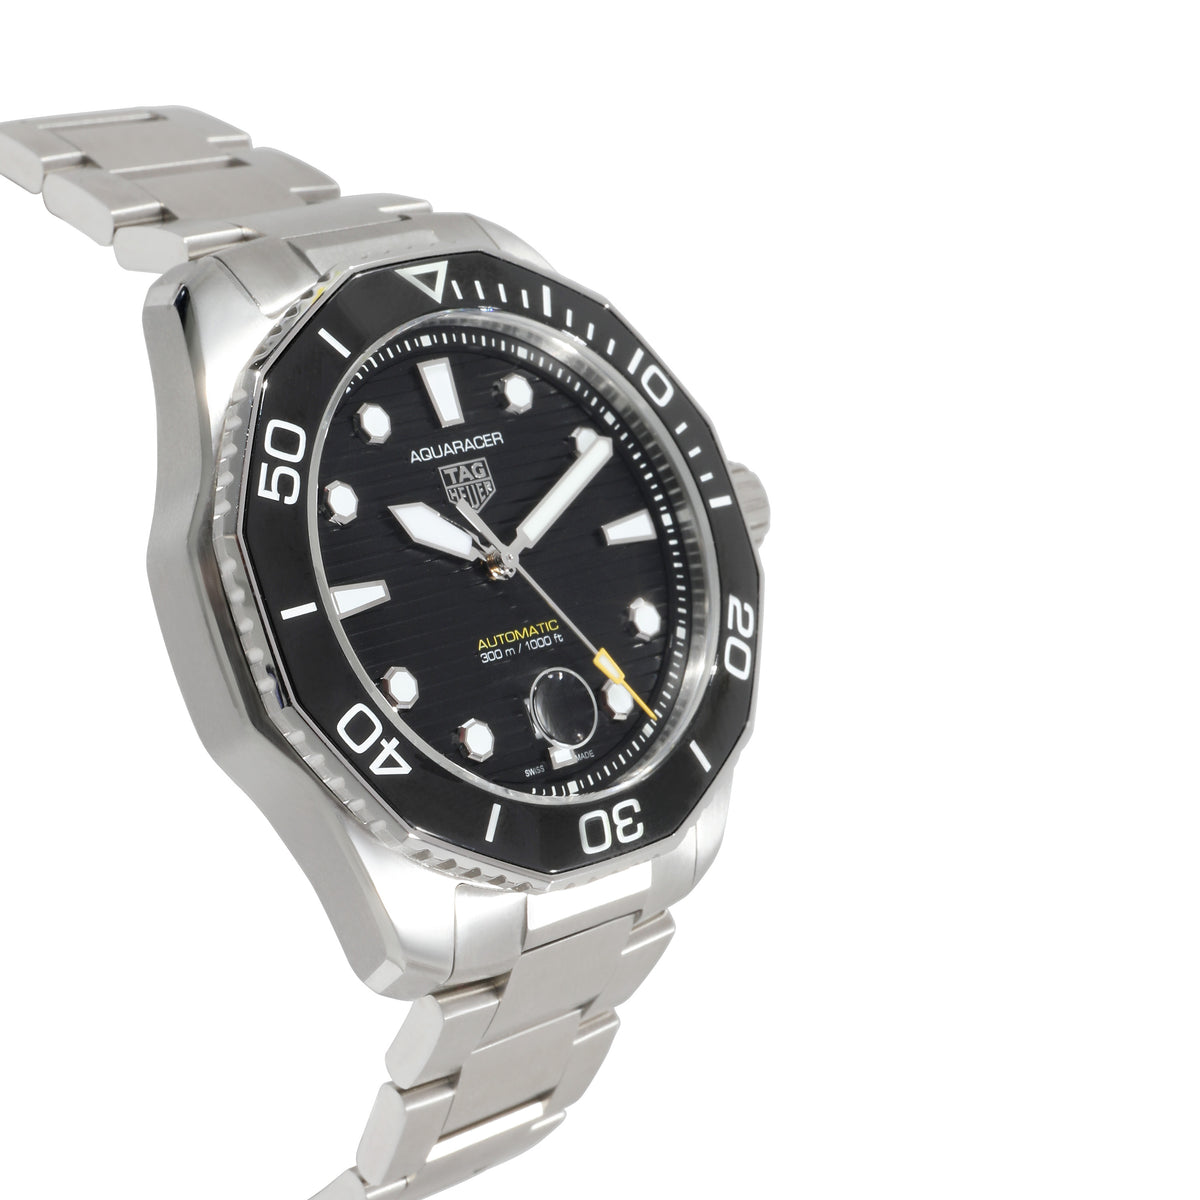 Tag Heuer Aquaracer WBP201A.BA0632 Men's Watch in  Stainless Steel